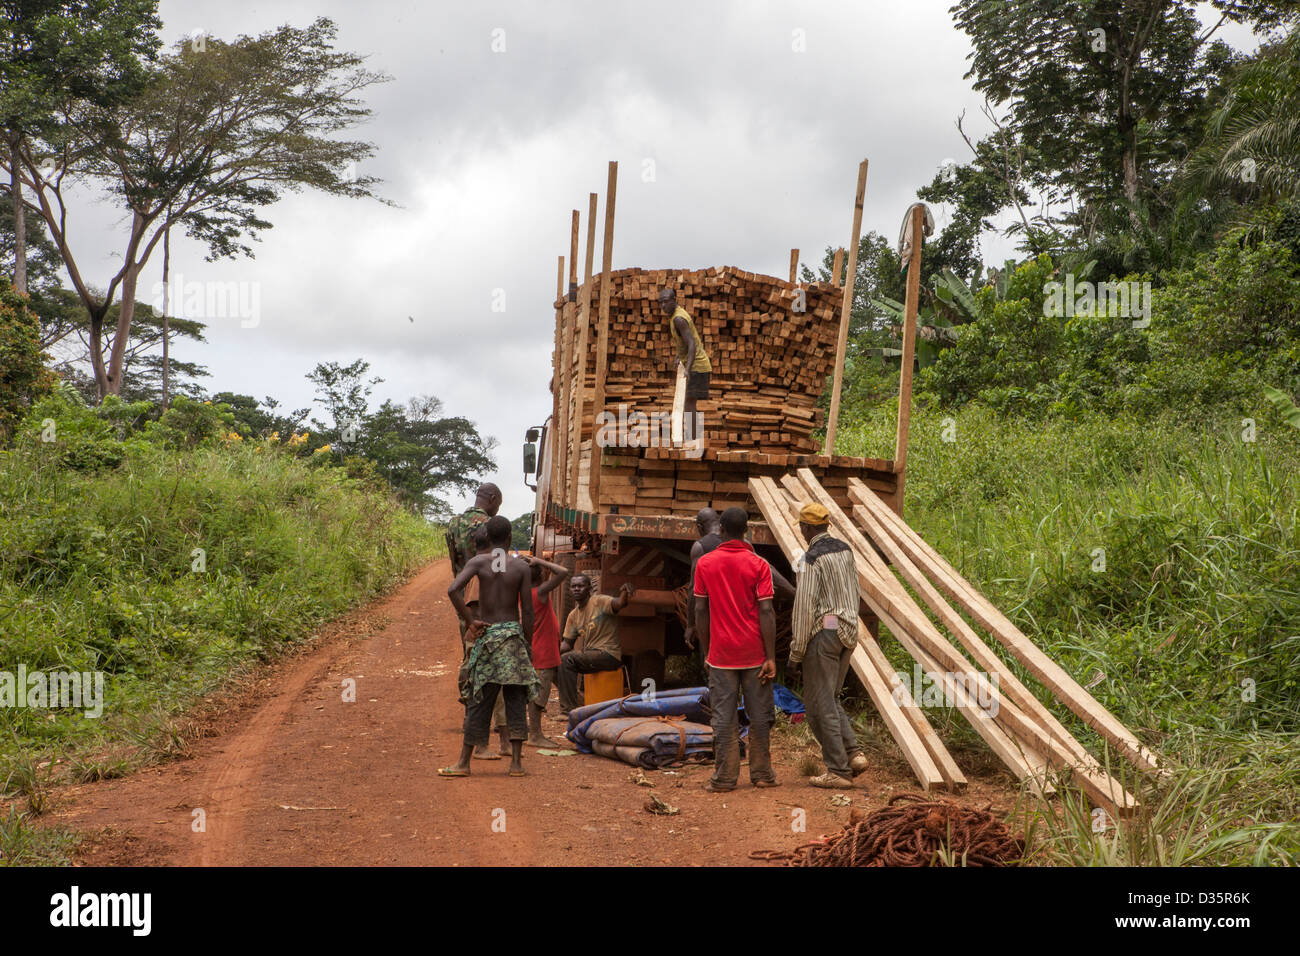 CONGO, 27th Sept 2012: A patrol of eco-guards investigate illegal logging of high quality timber from the forest. Stock Photo